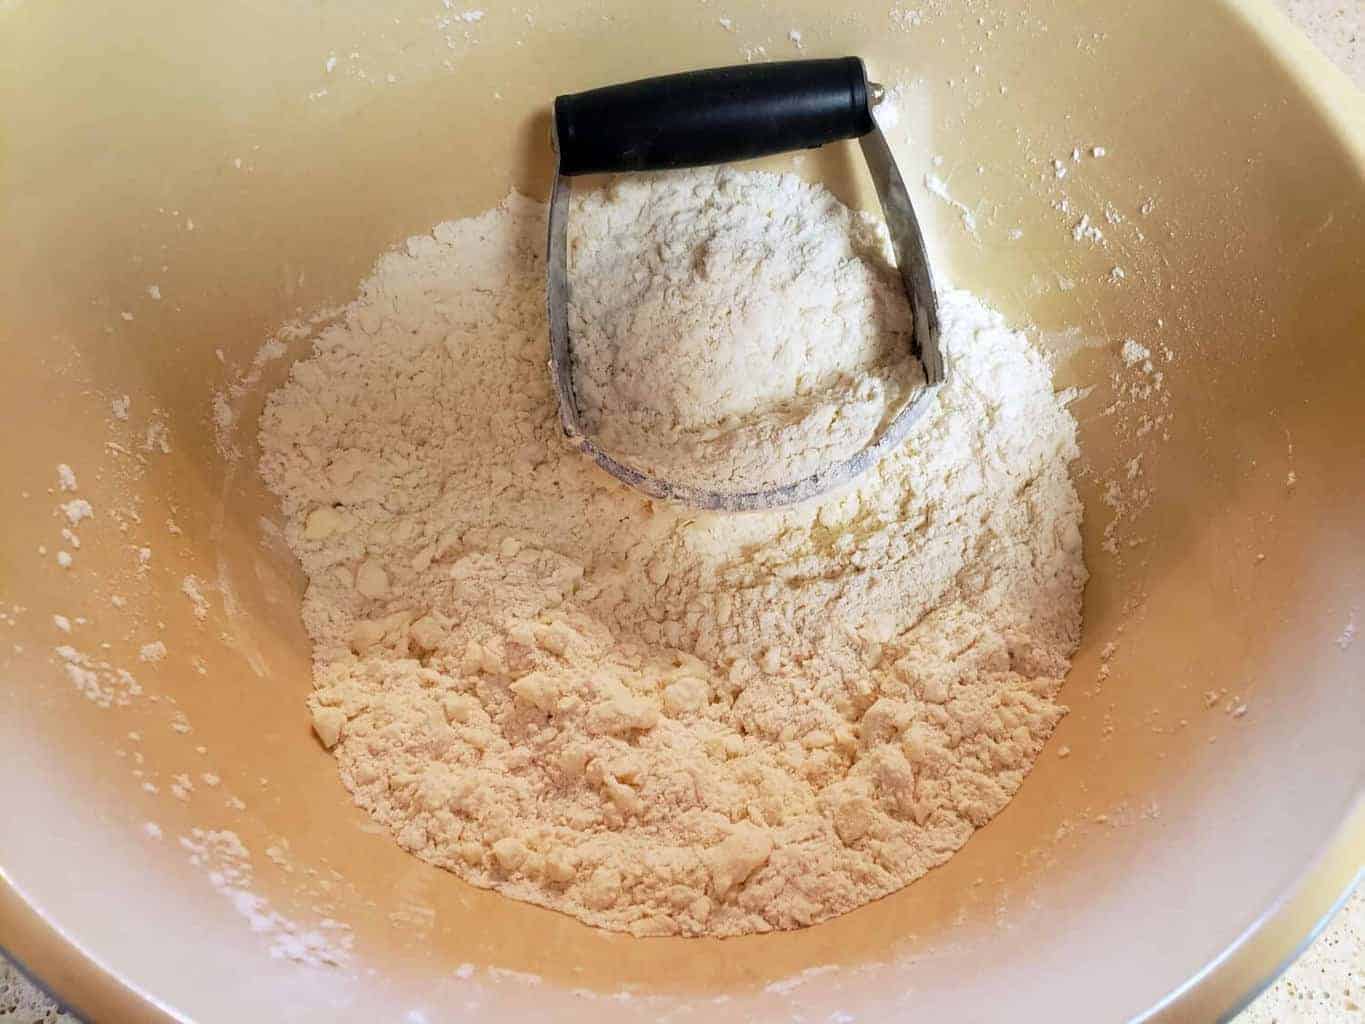 butter cut into flour mixture in bowl with pastry cutter